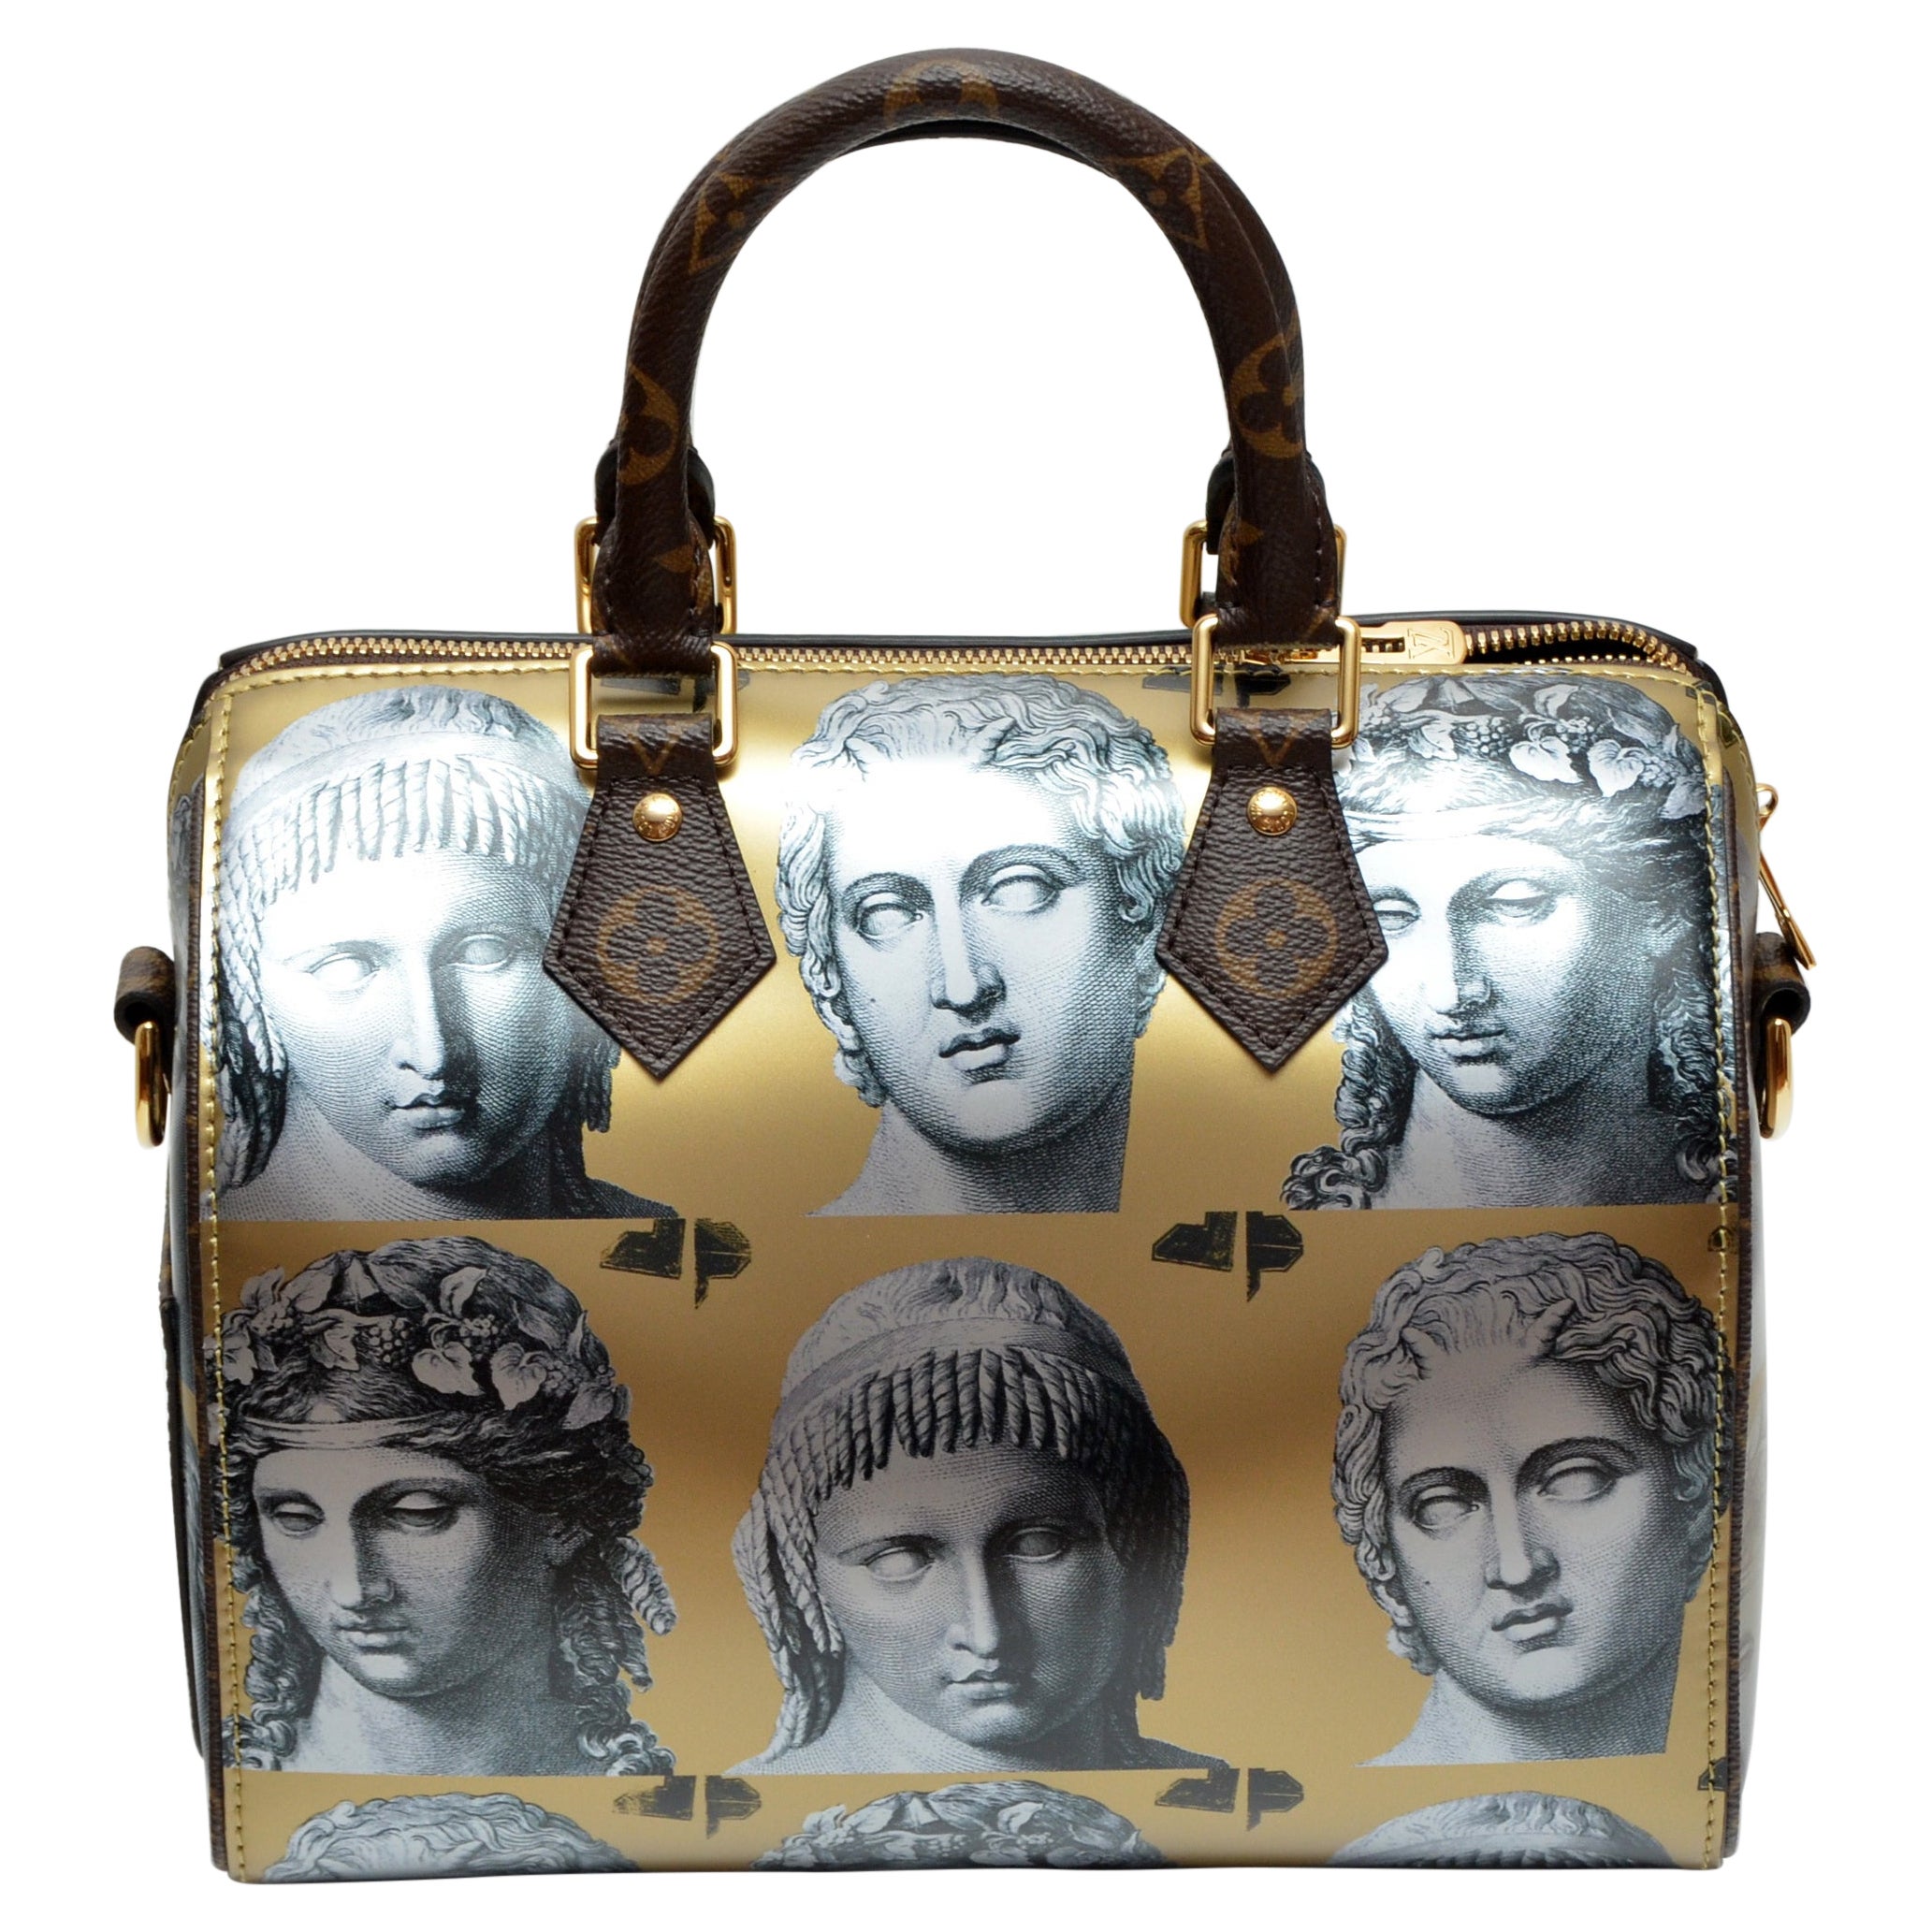 BRAND NEW-Limited edition Louis Vuitton Speedy 25 strap Fornasetti